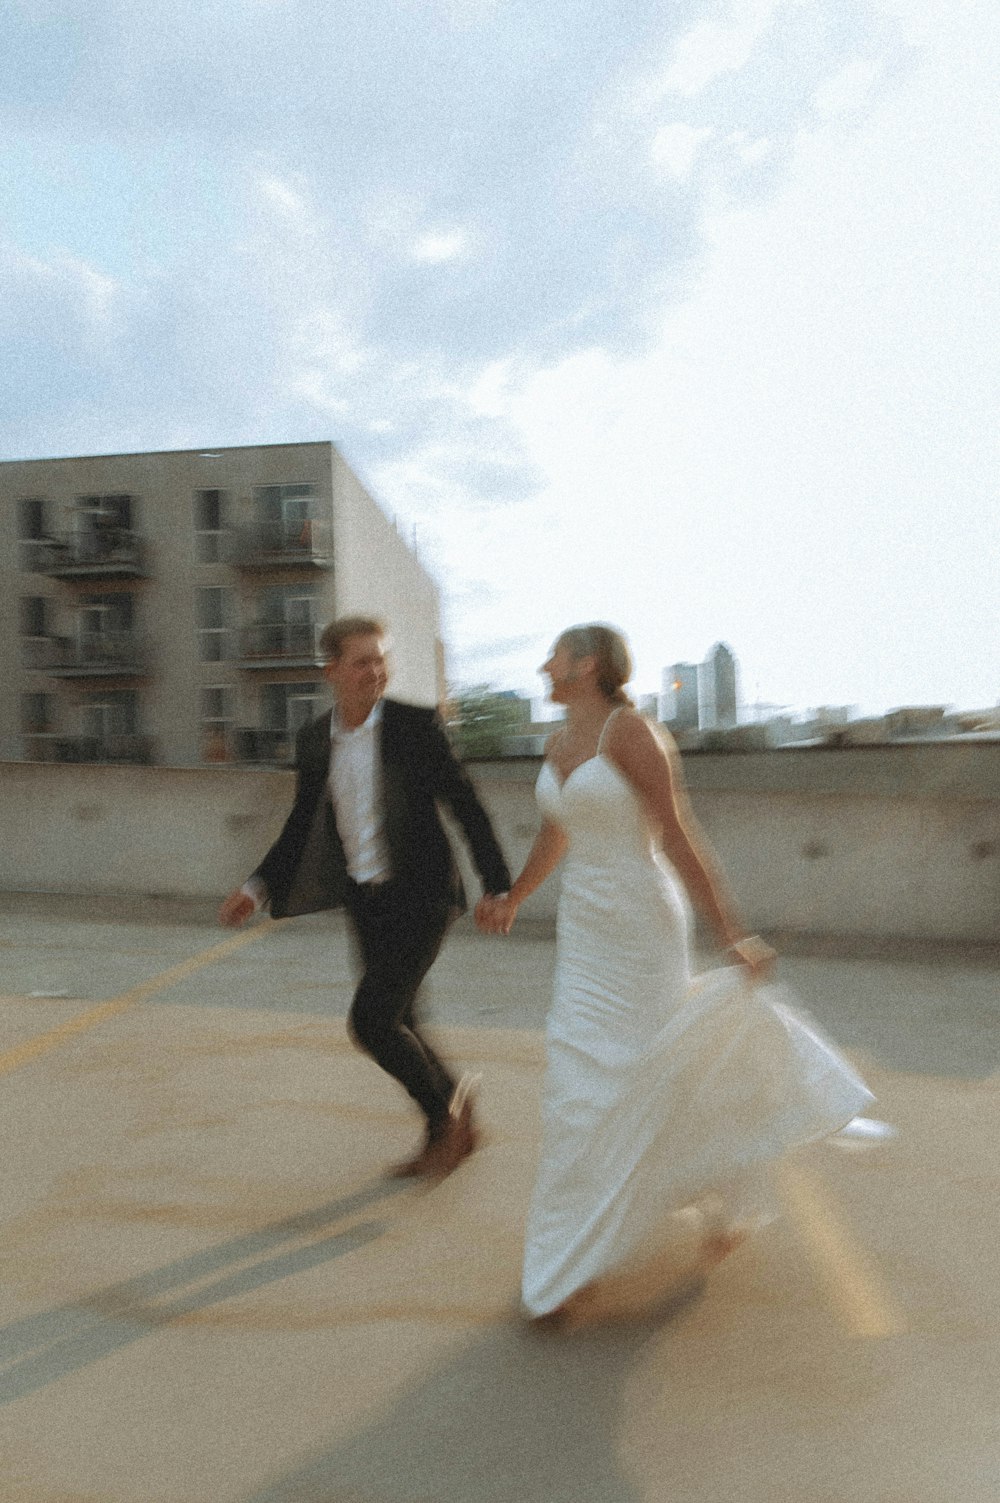 man in black suit jacket and woman in white dress walking on brown concrete floor during